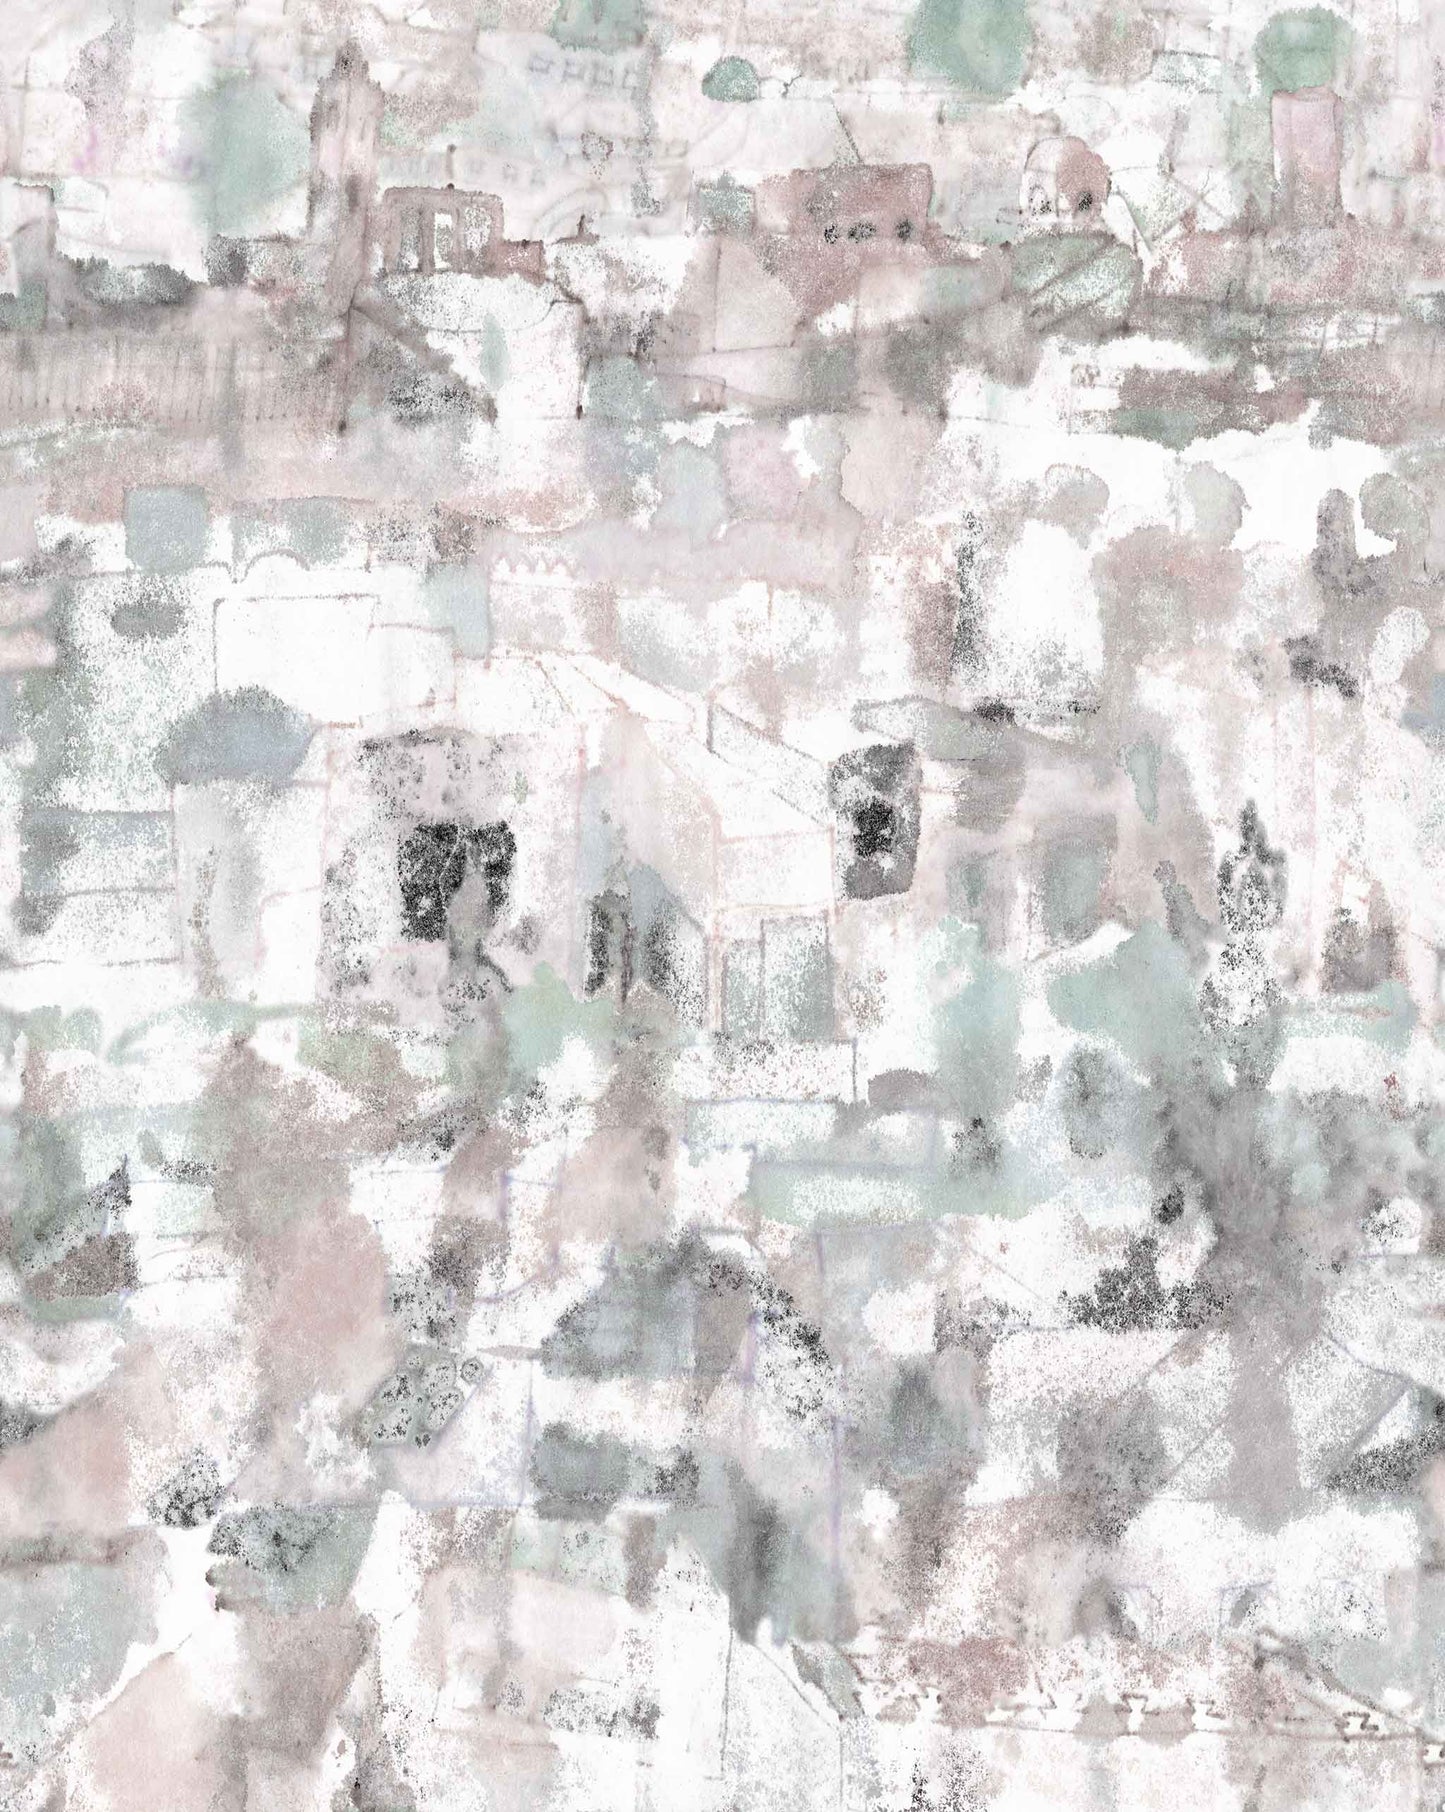 Abstract watercolor painting featuring soft pastel hues and blended patches, creating a textured mosaic effect inspired by the Kotoubia Wallpaper Mural.